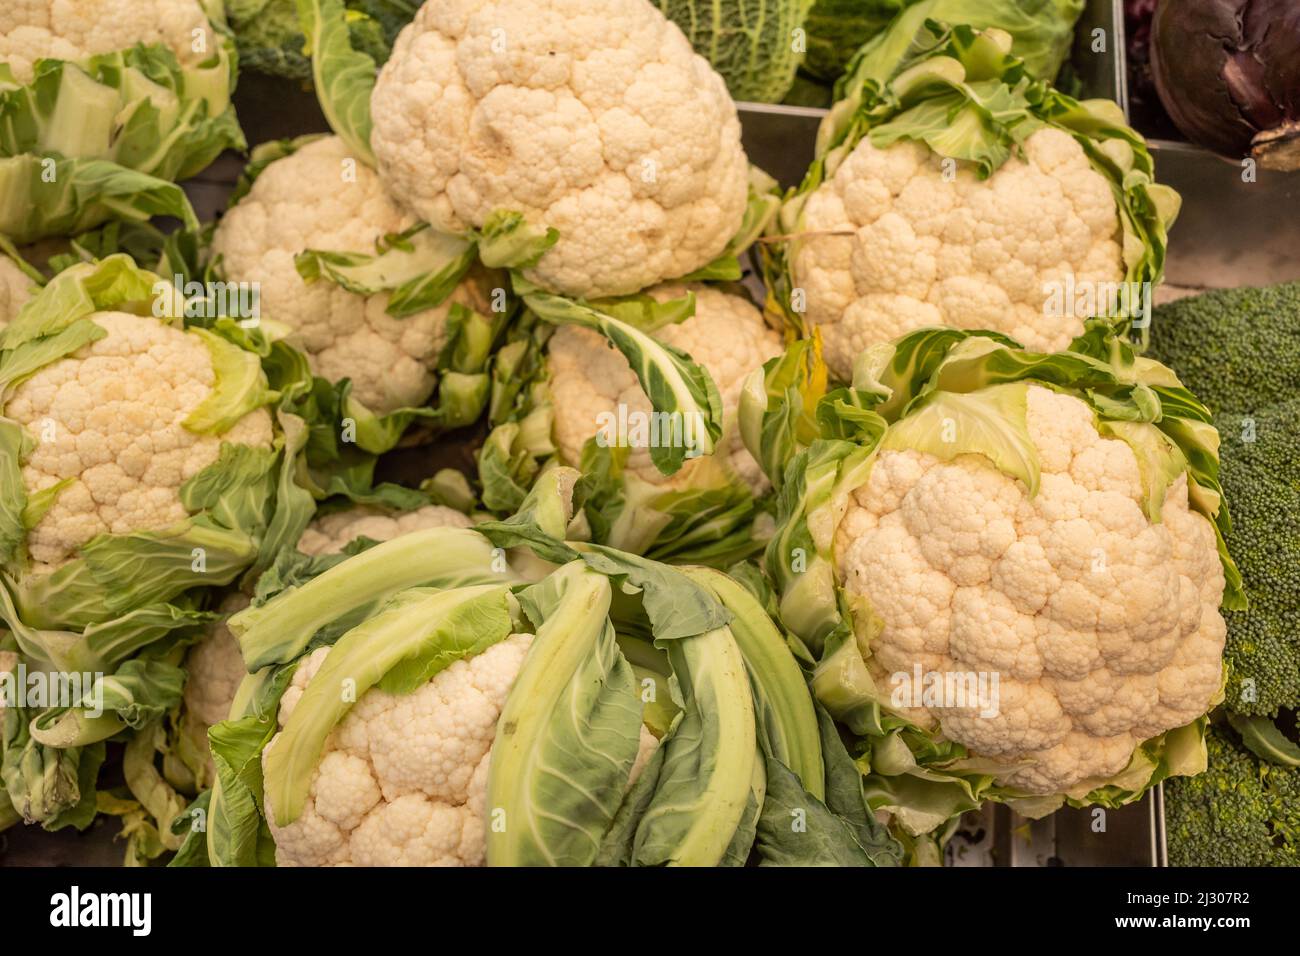 A display of white cauliflowers in a box at a grocery store. Stock Photo